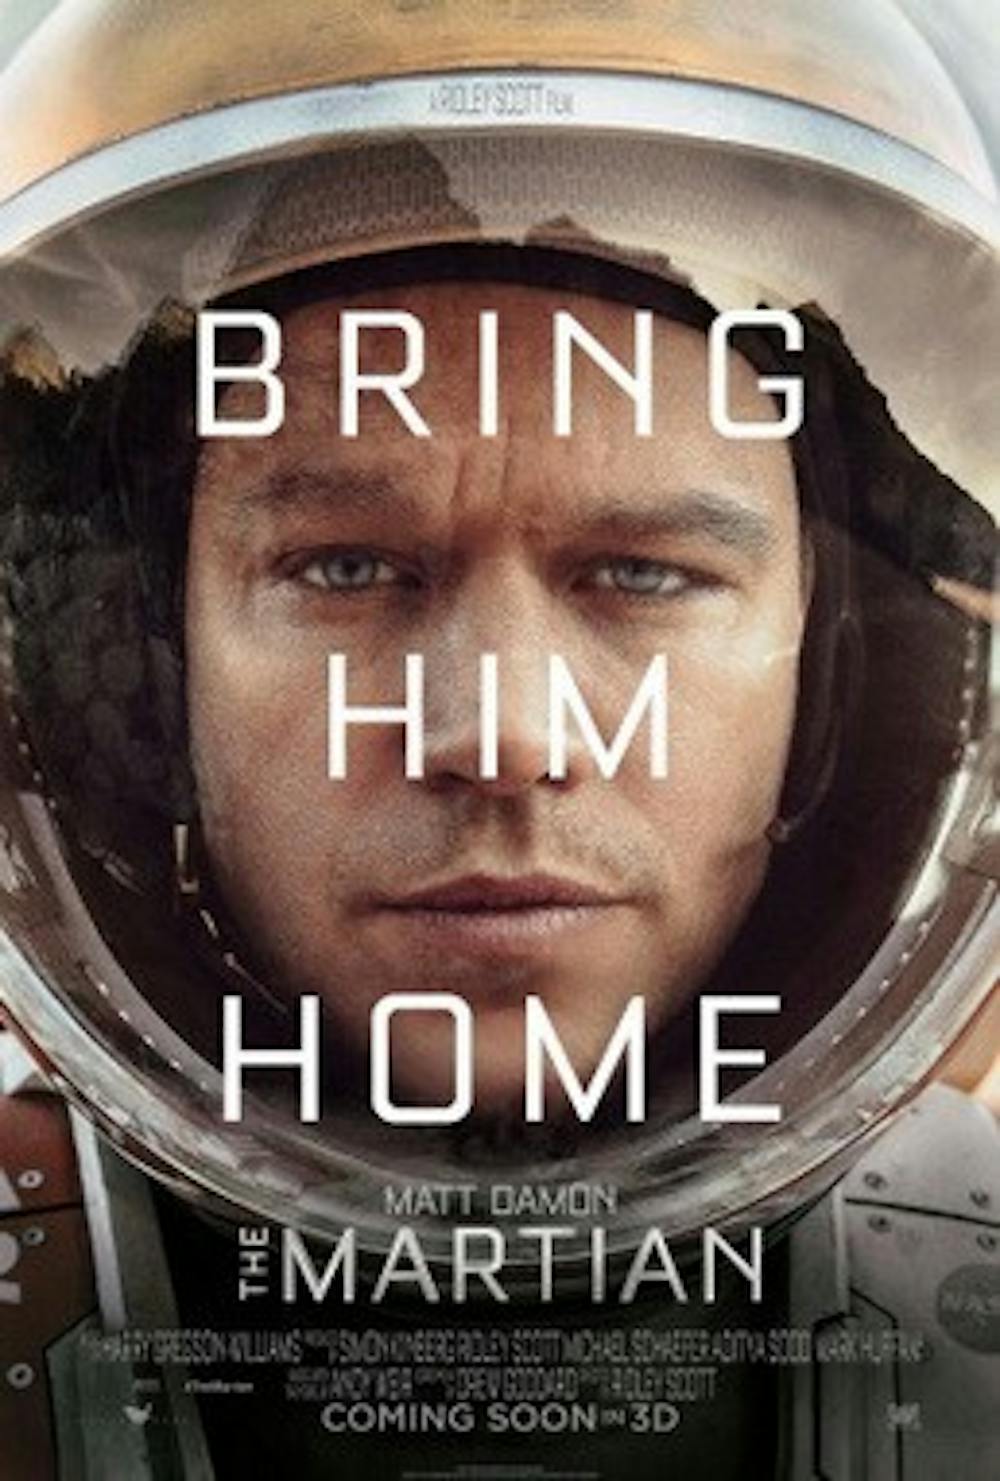 Pros and cons of box office hit, The Martian 